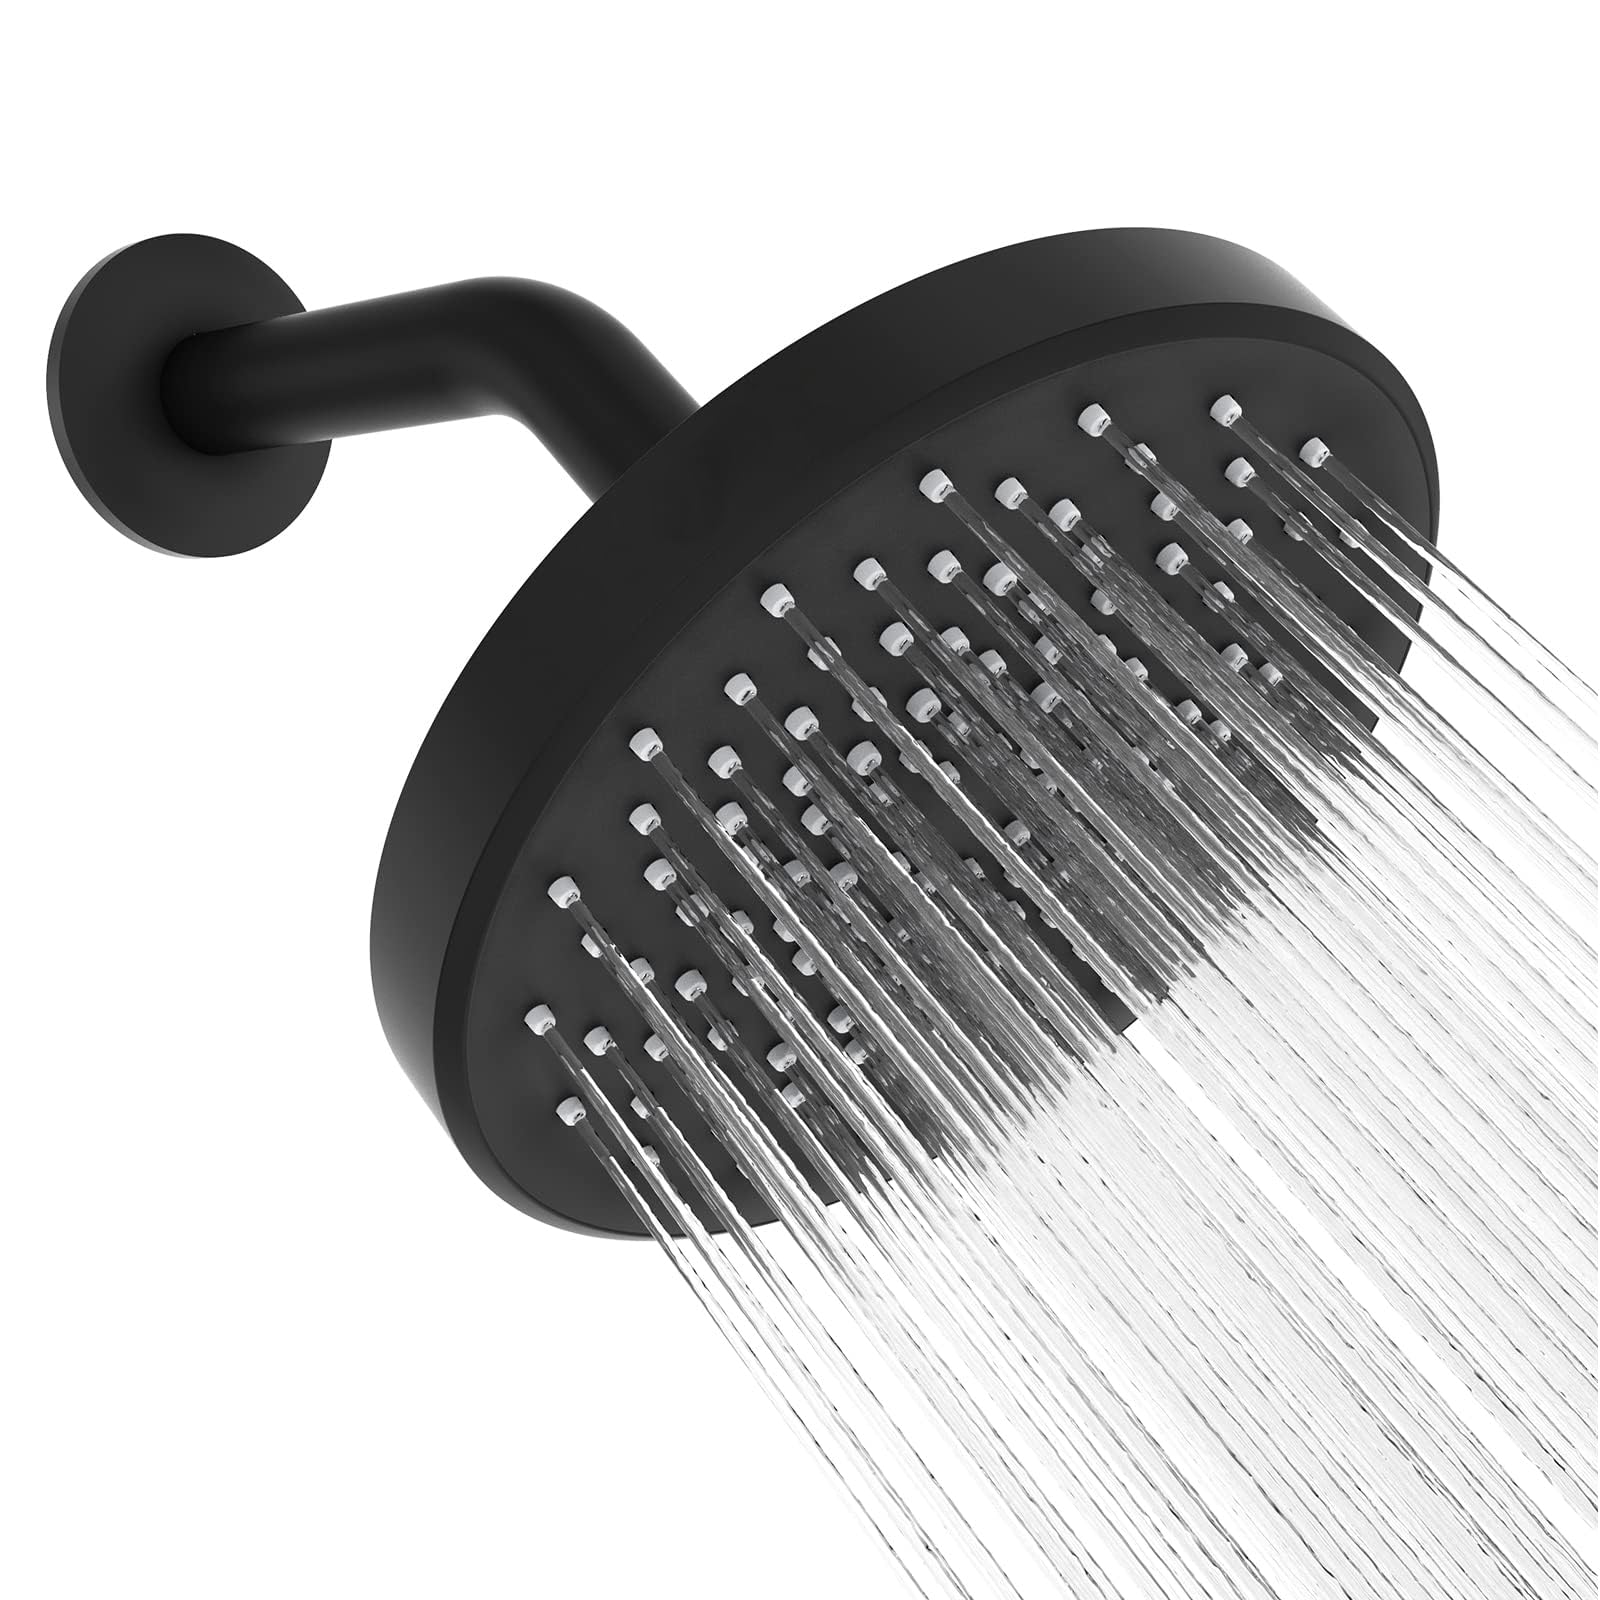 Shower Head High Pressure Rain Shower Heads with 360°Adjustable Angles, Anti-Clogging Silicone Nozzles, Luxury Bathroom Showerheads Waterfall Showerhead(Chrome, 6 Inch Round,2.5 GPM)